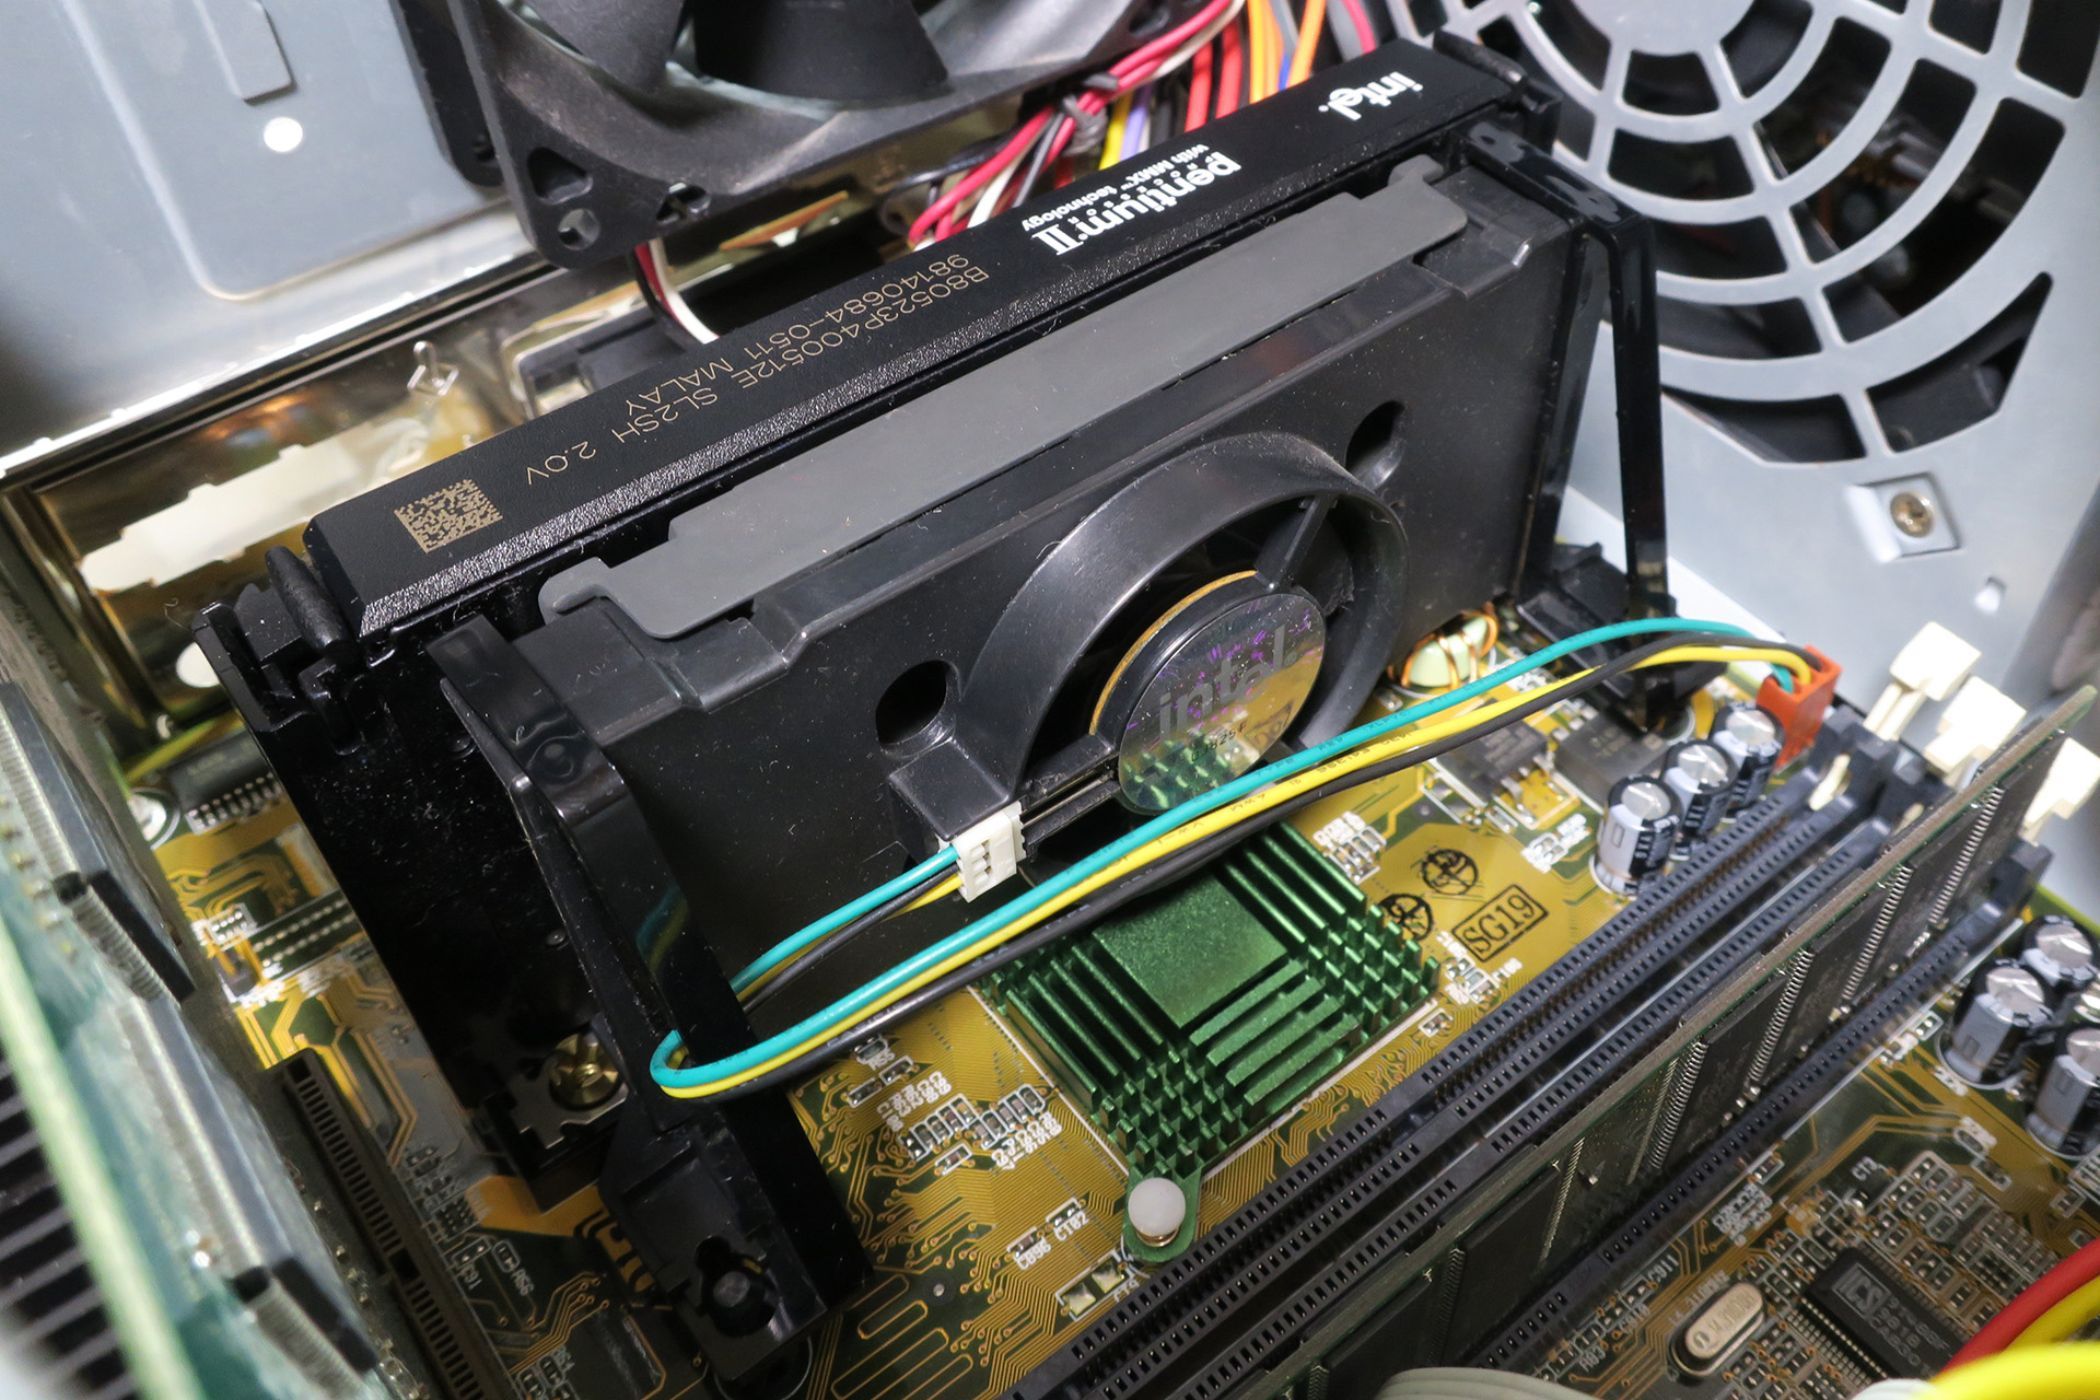 An image showing a Pentium II slot CPU form installed on a motherboard.